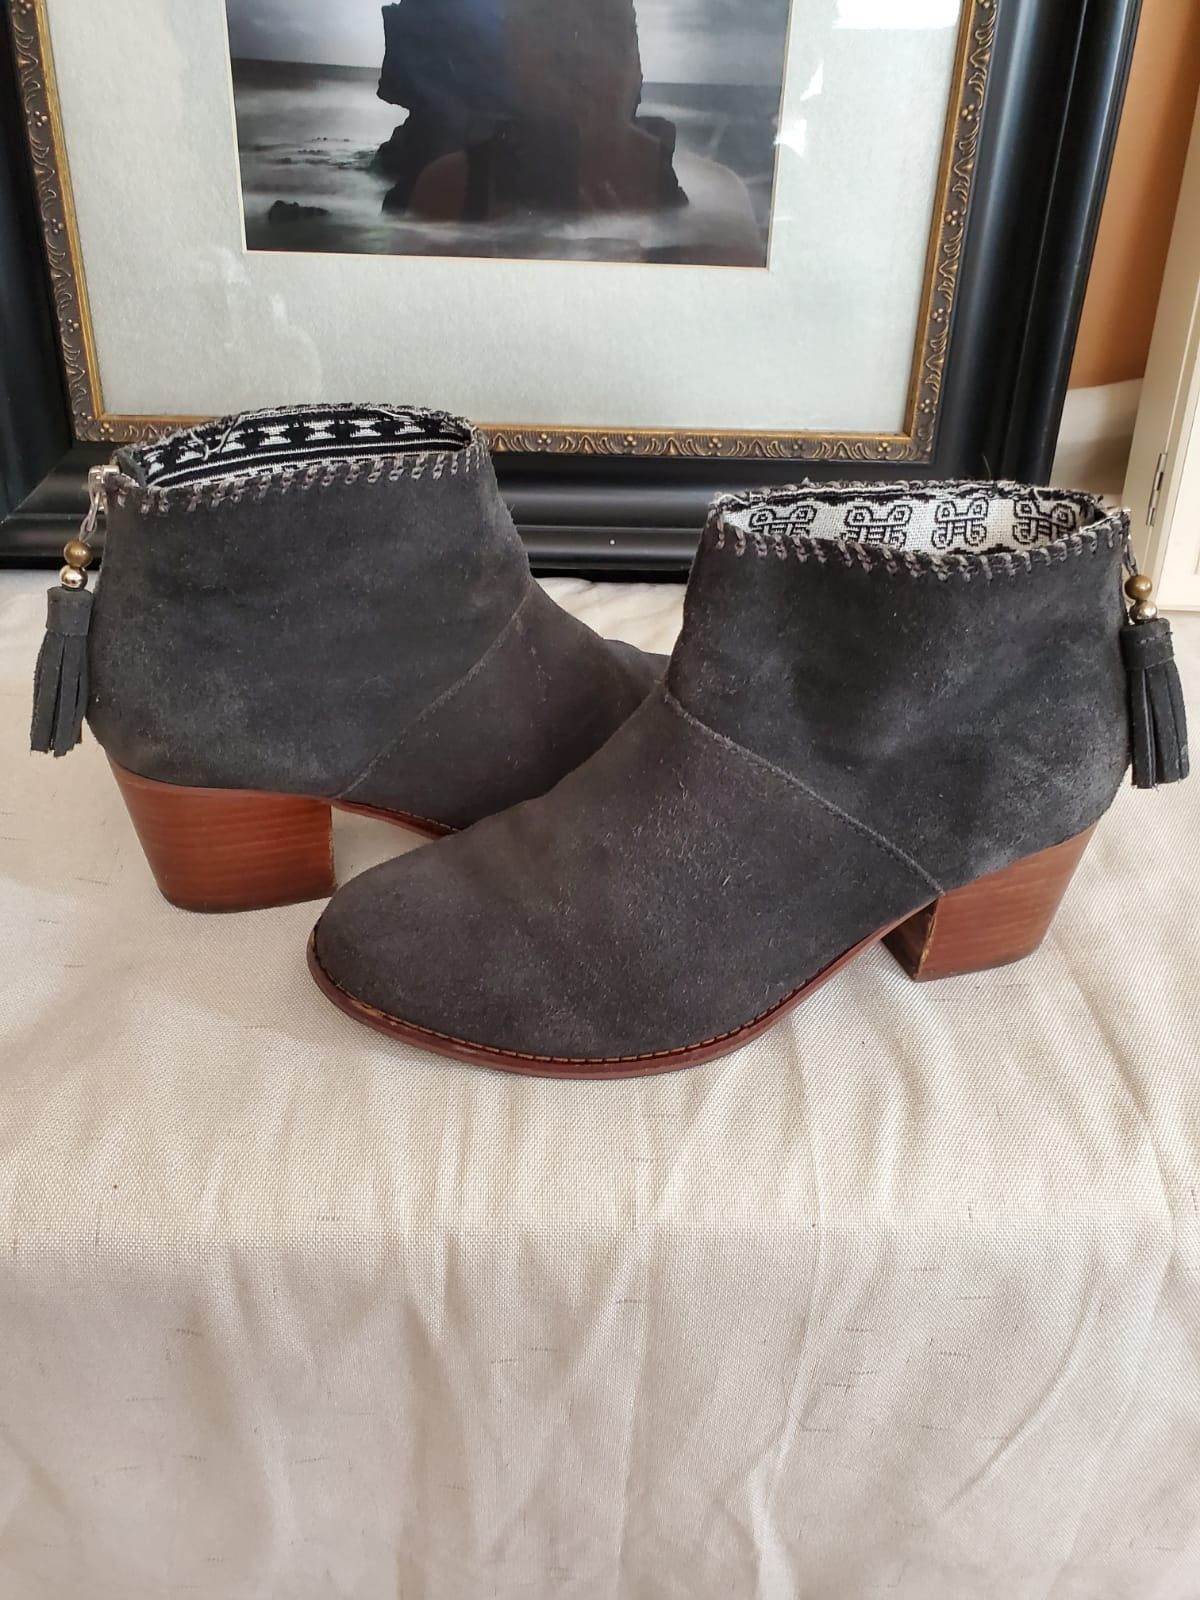 Tom's women's lowcut boots